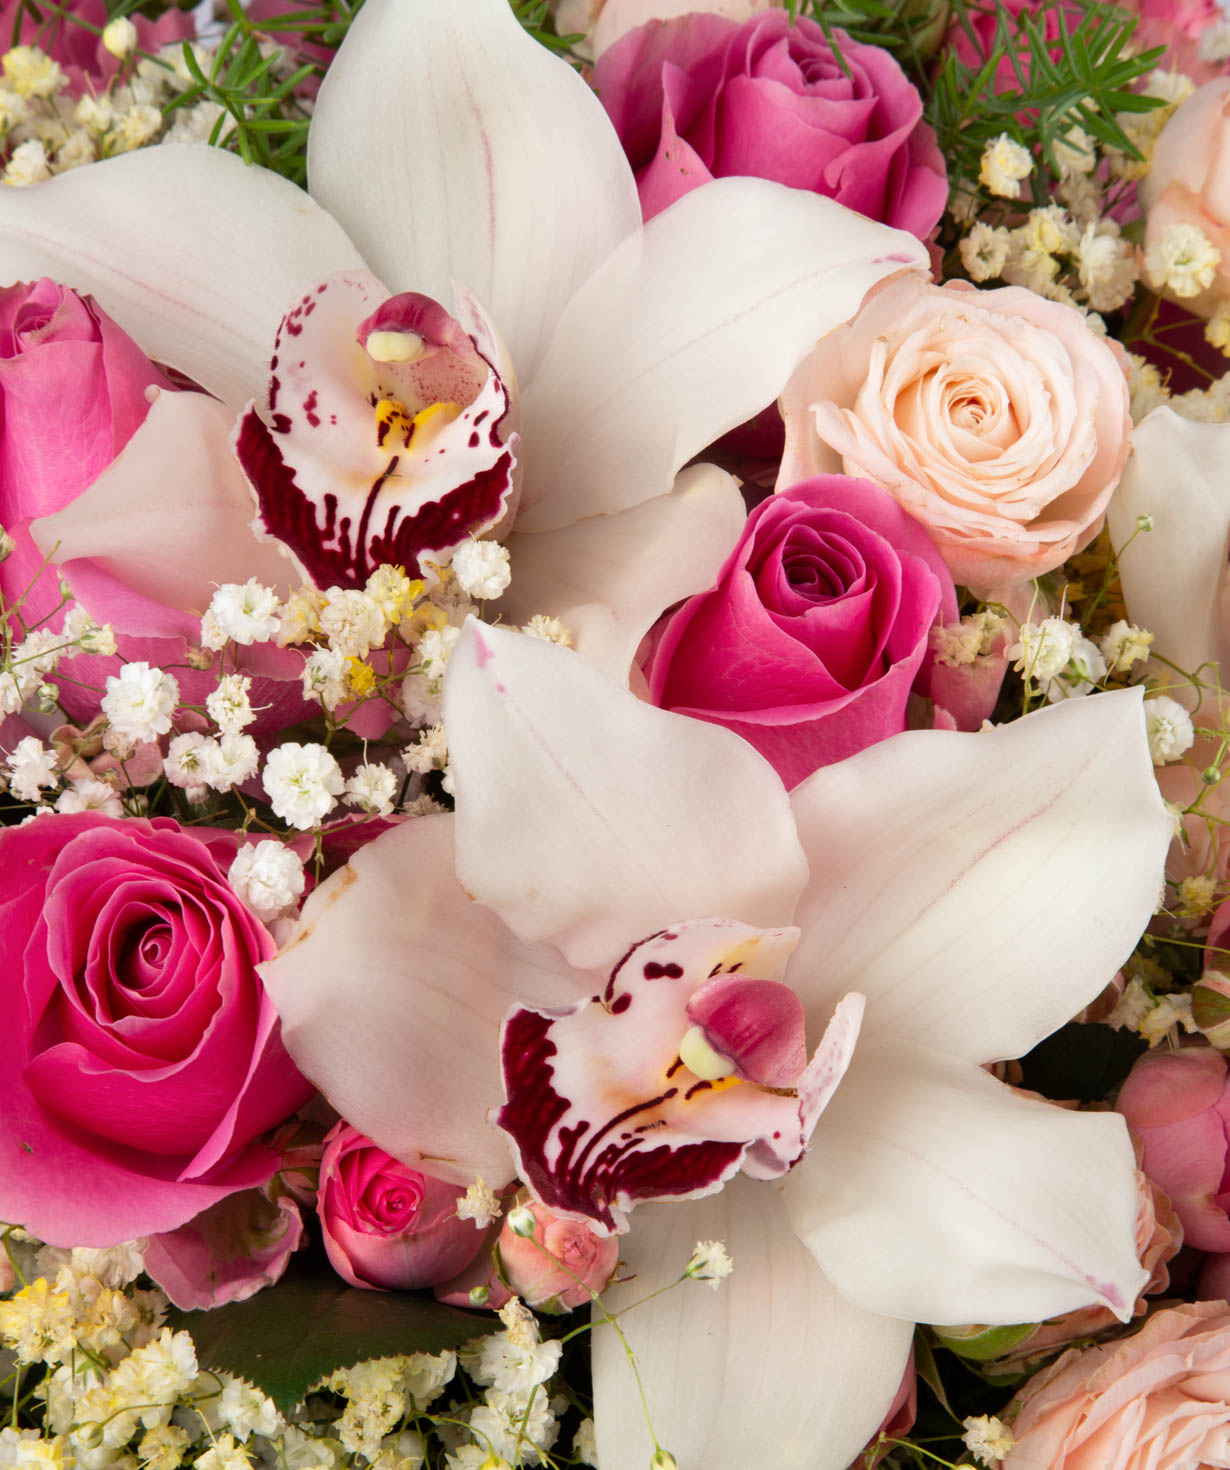 Composition `Bregenz` with roses, orchids and gypsophila